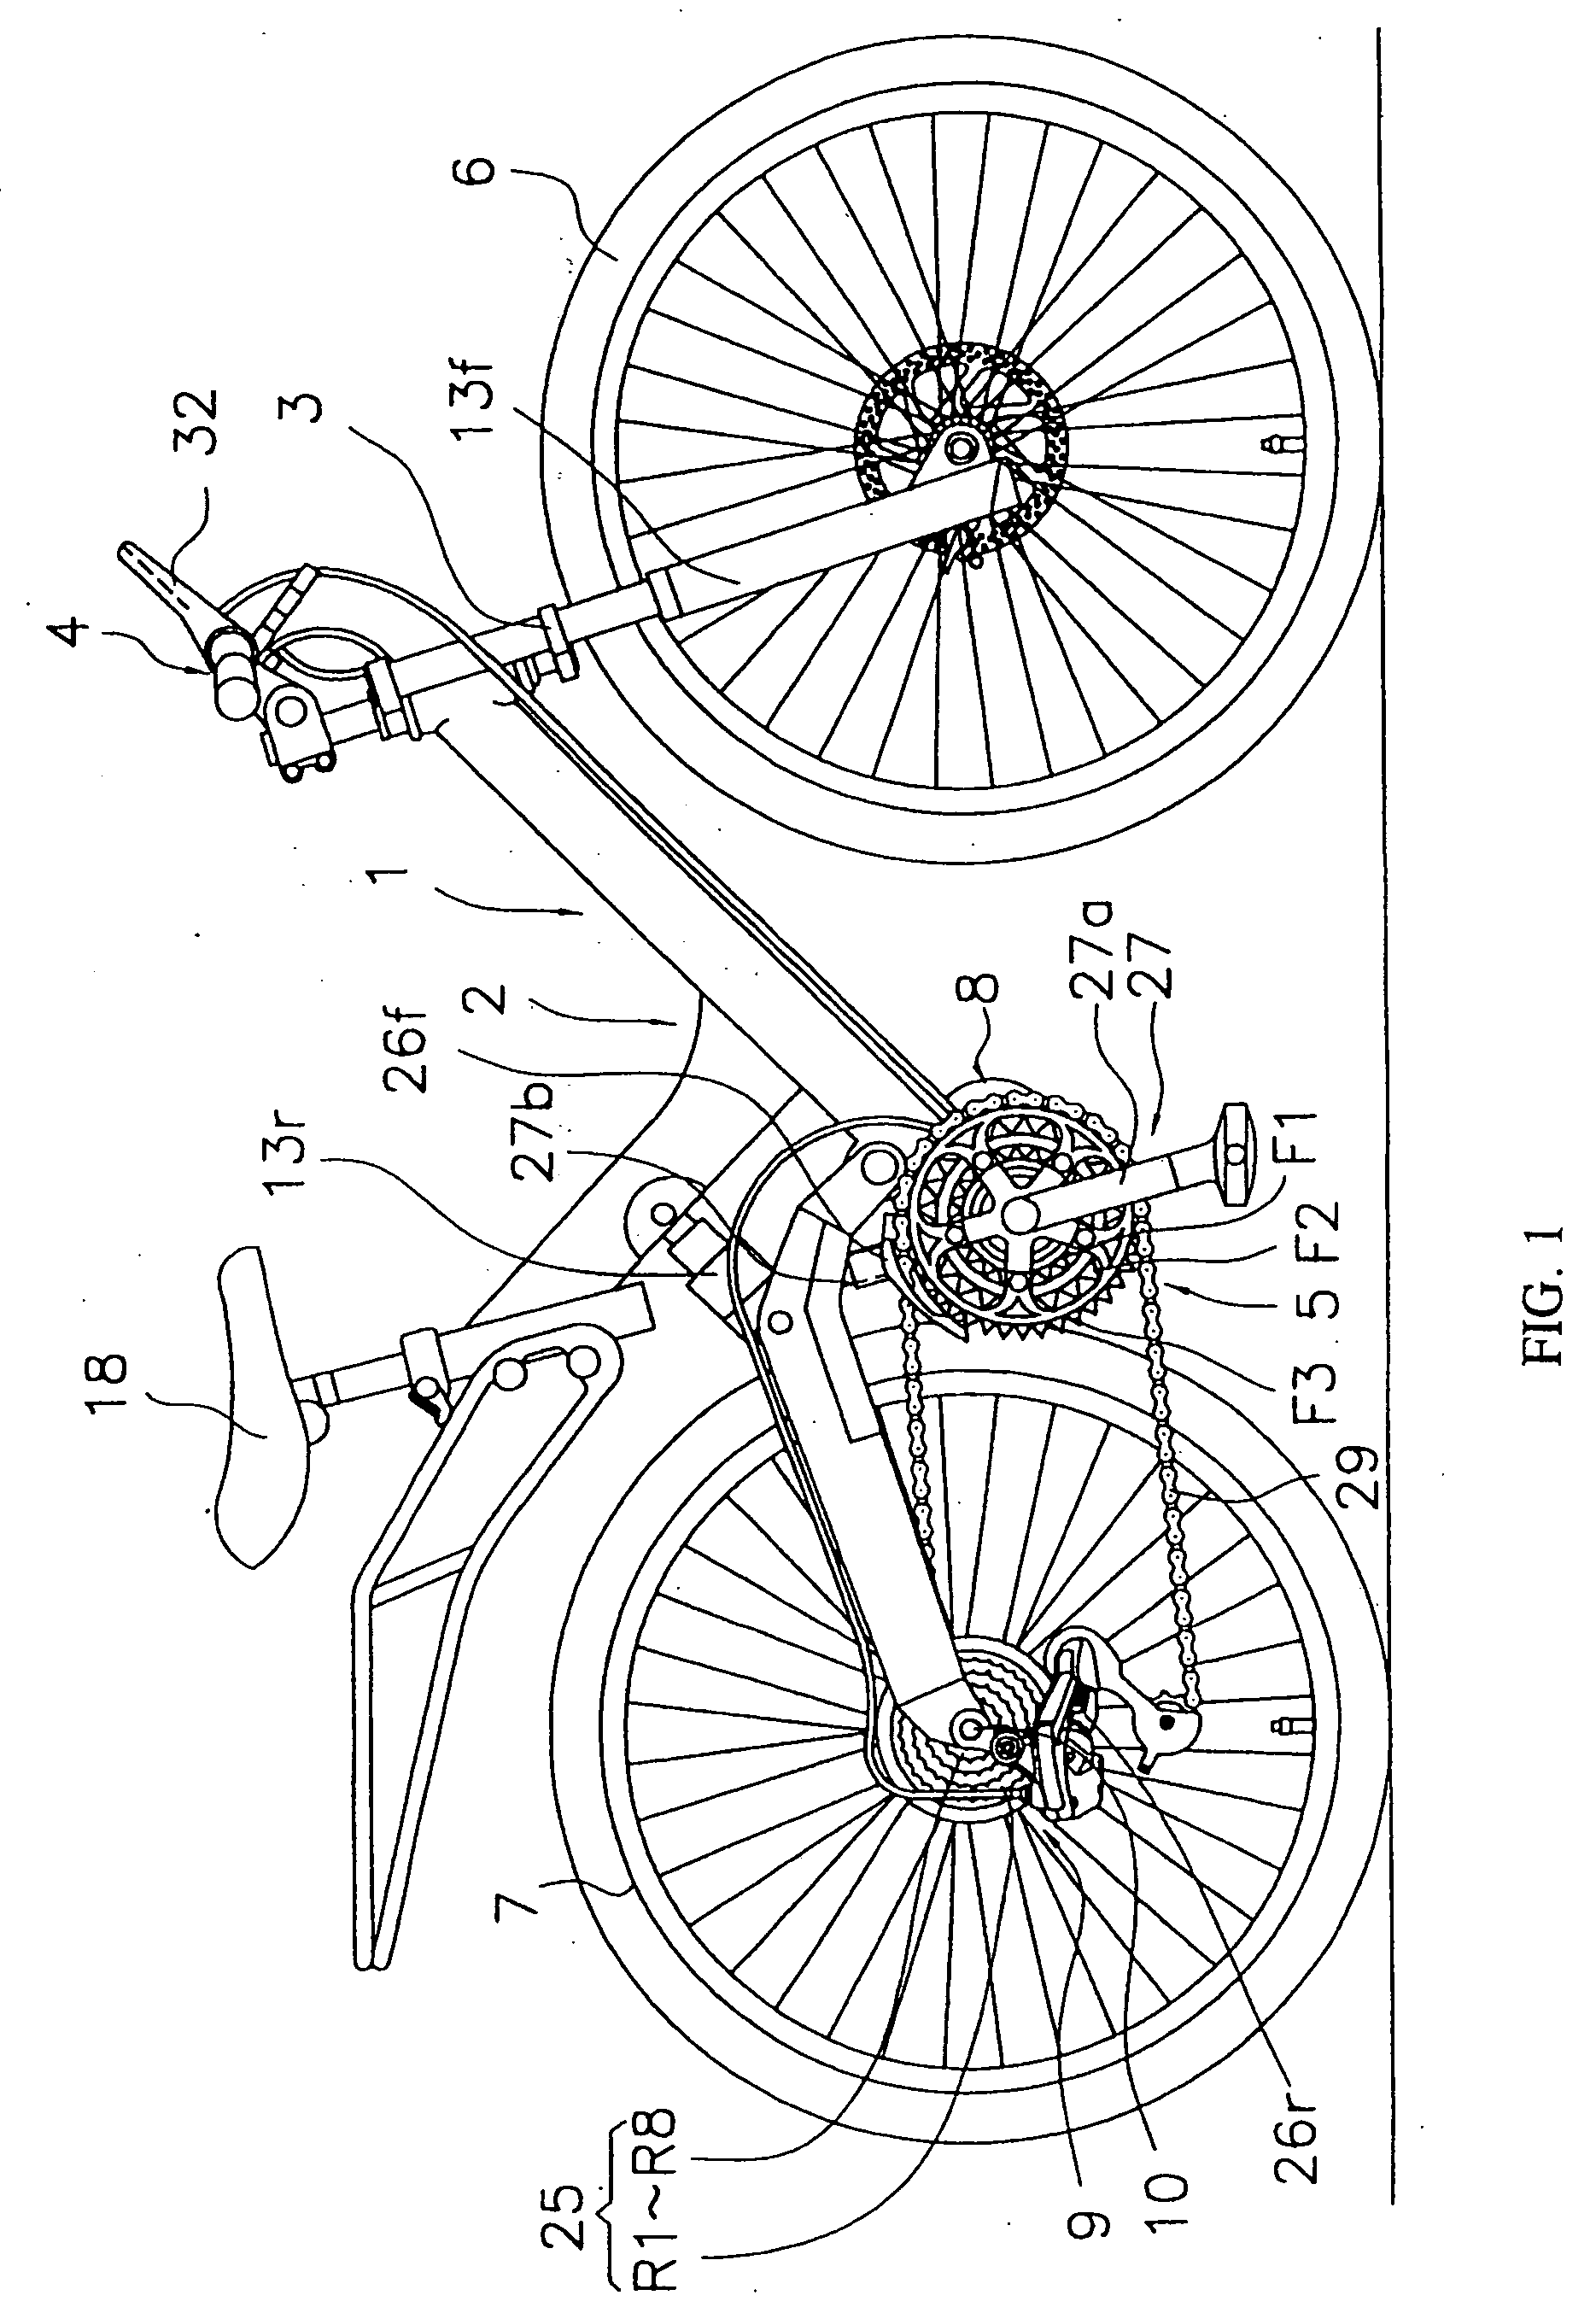 Wiring connection structure for bicycle